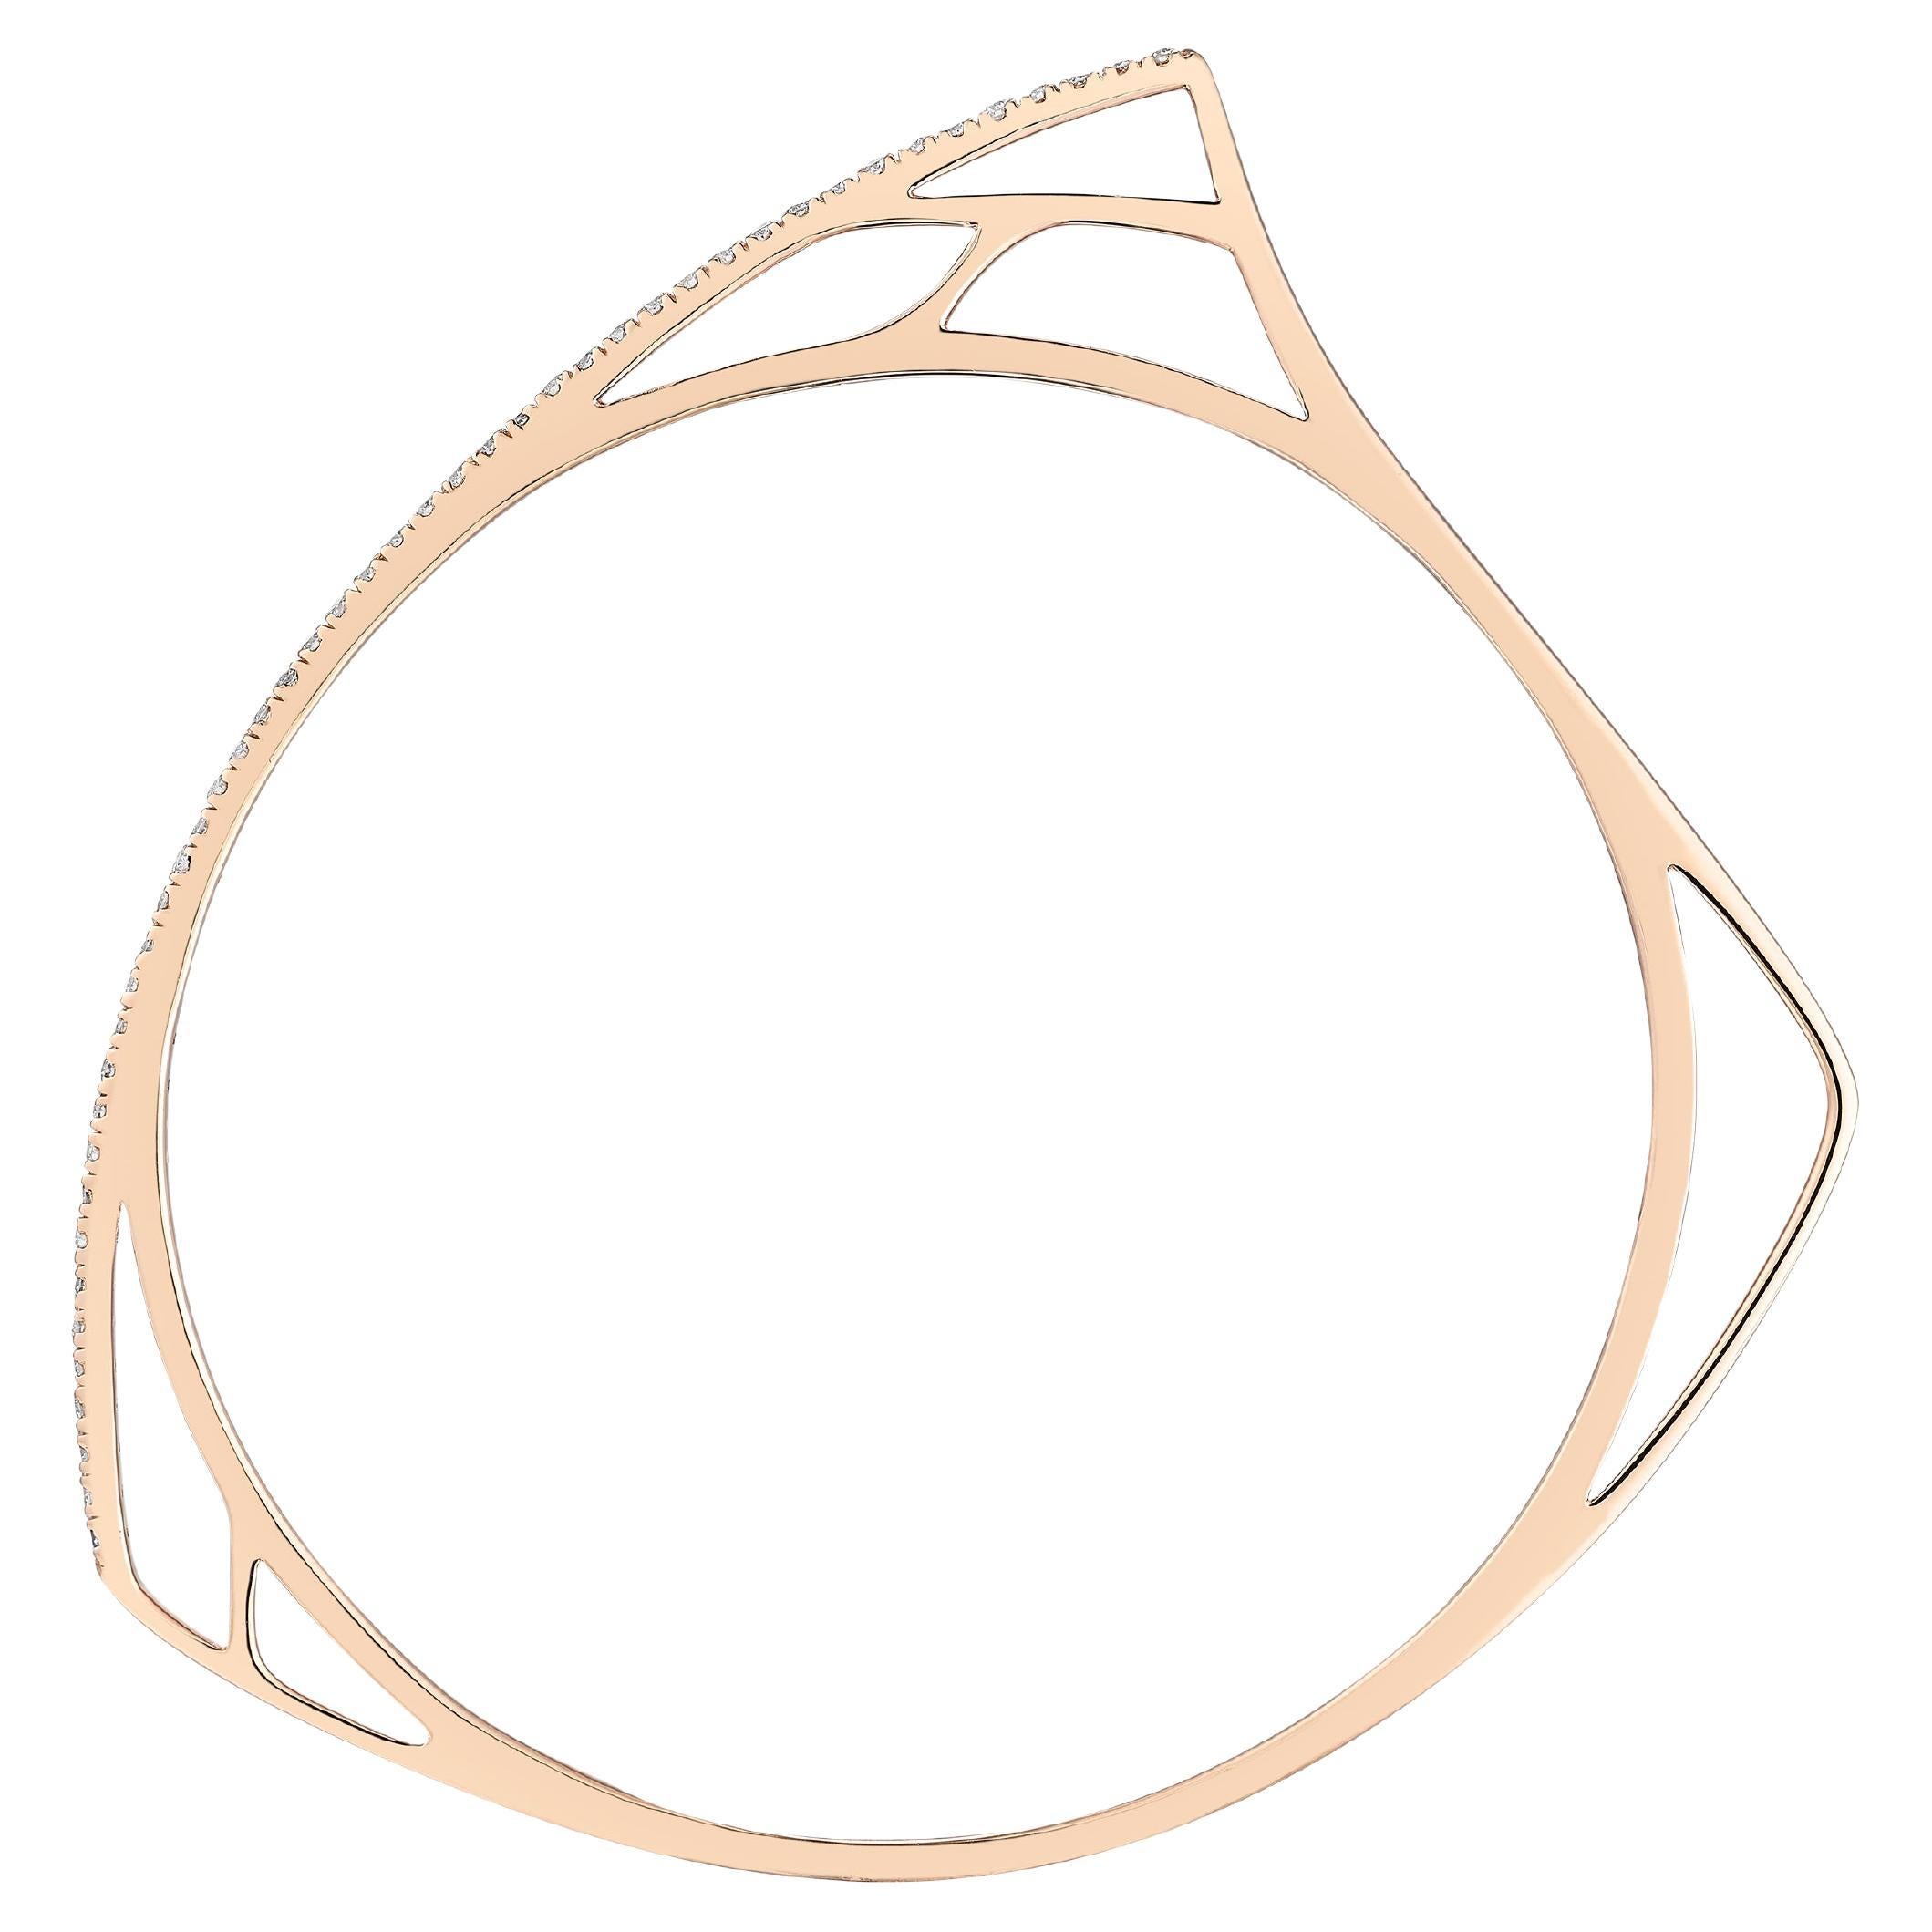 Contemporary Anabela Chan Fine Sustainable Jewelry Rose Gold Diamond Morpho Bracelet 2 Size S For Sale